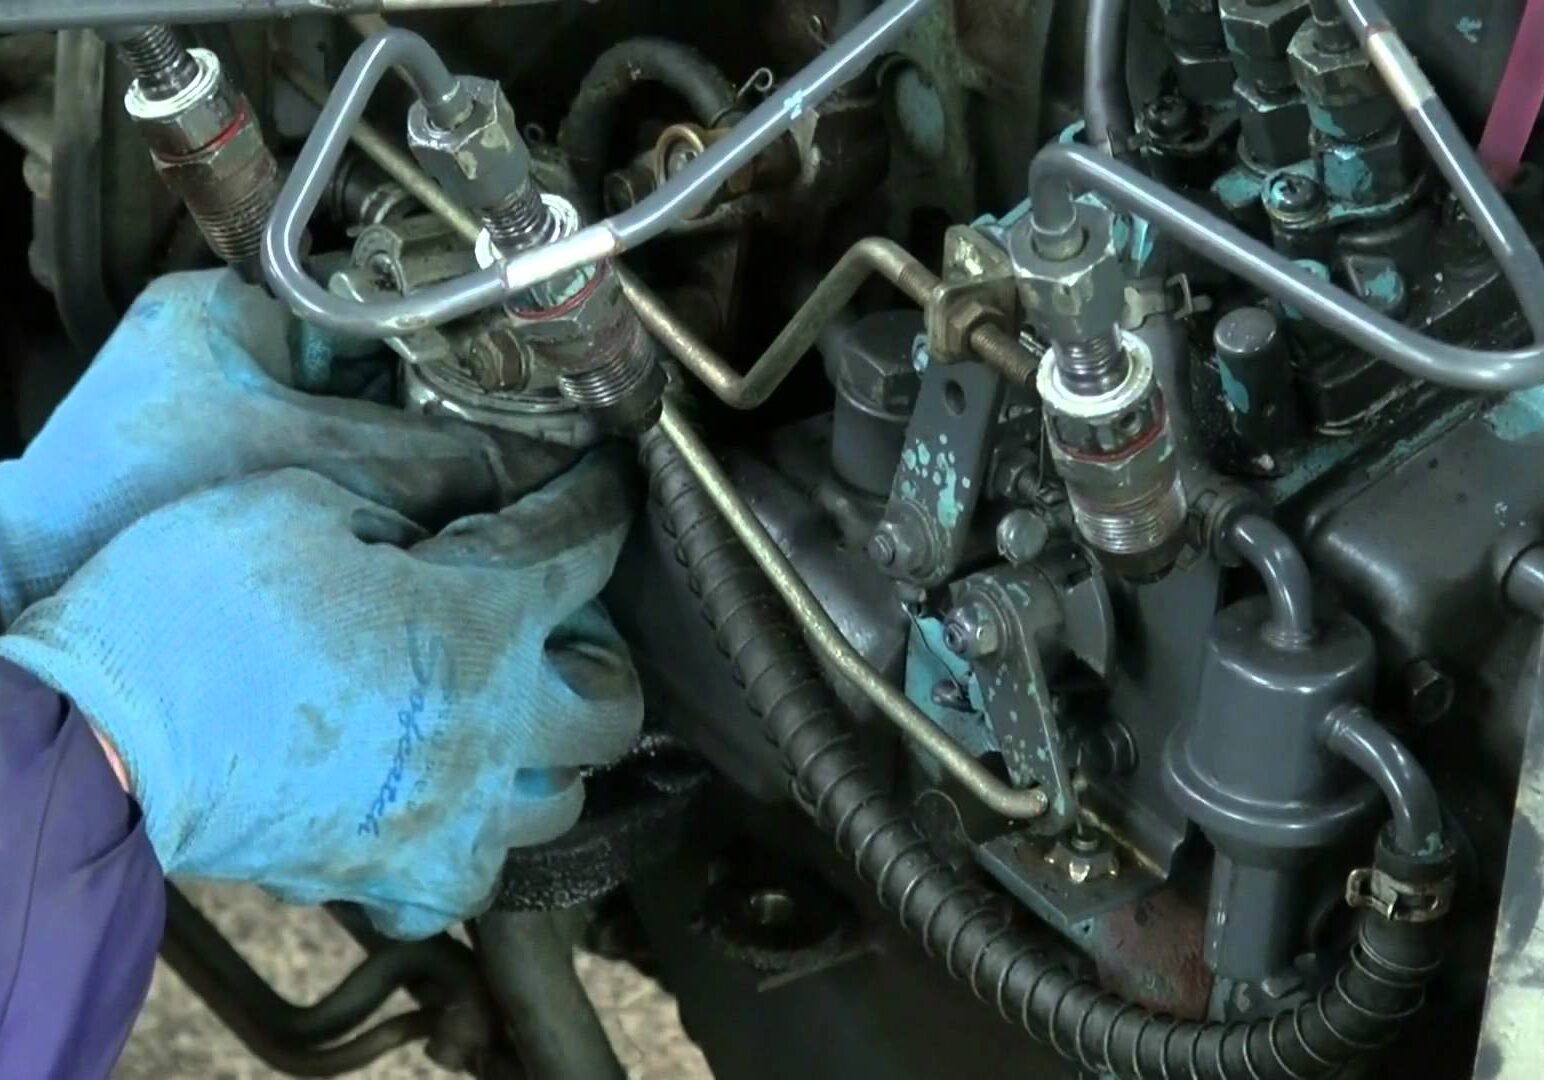 Man working on engine fuel system